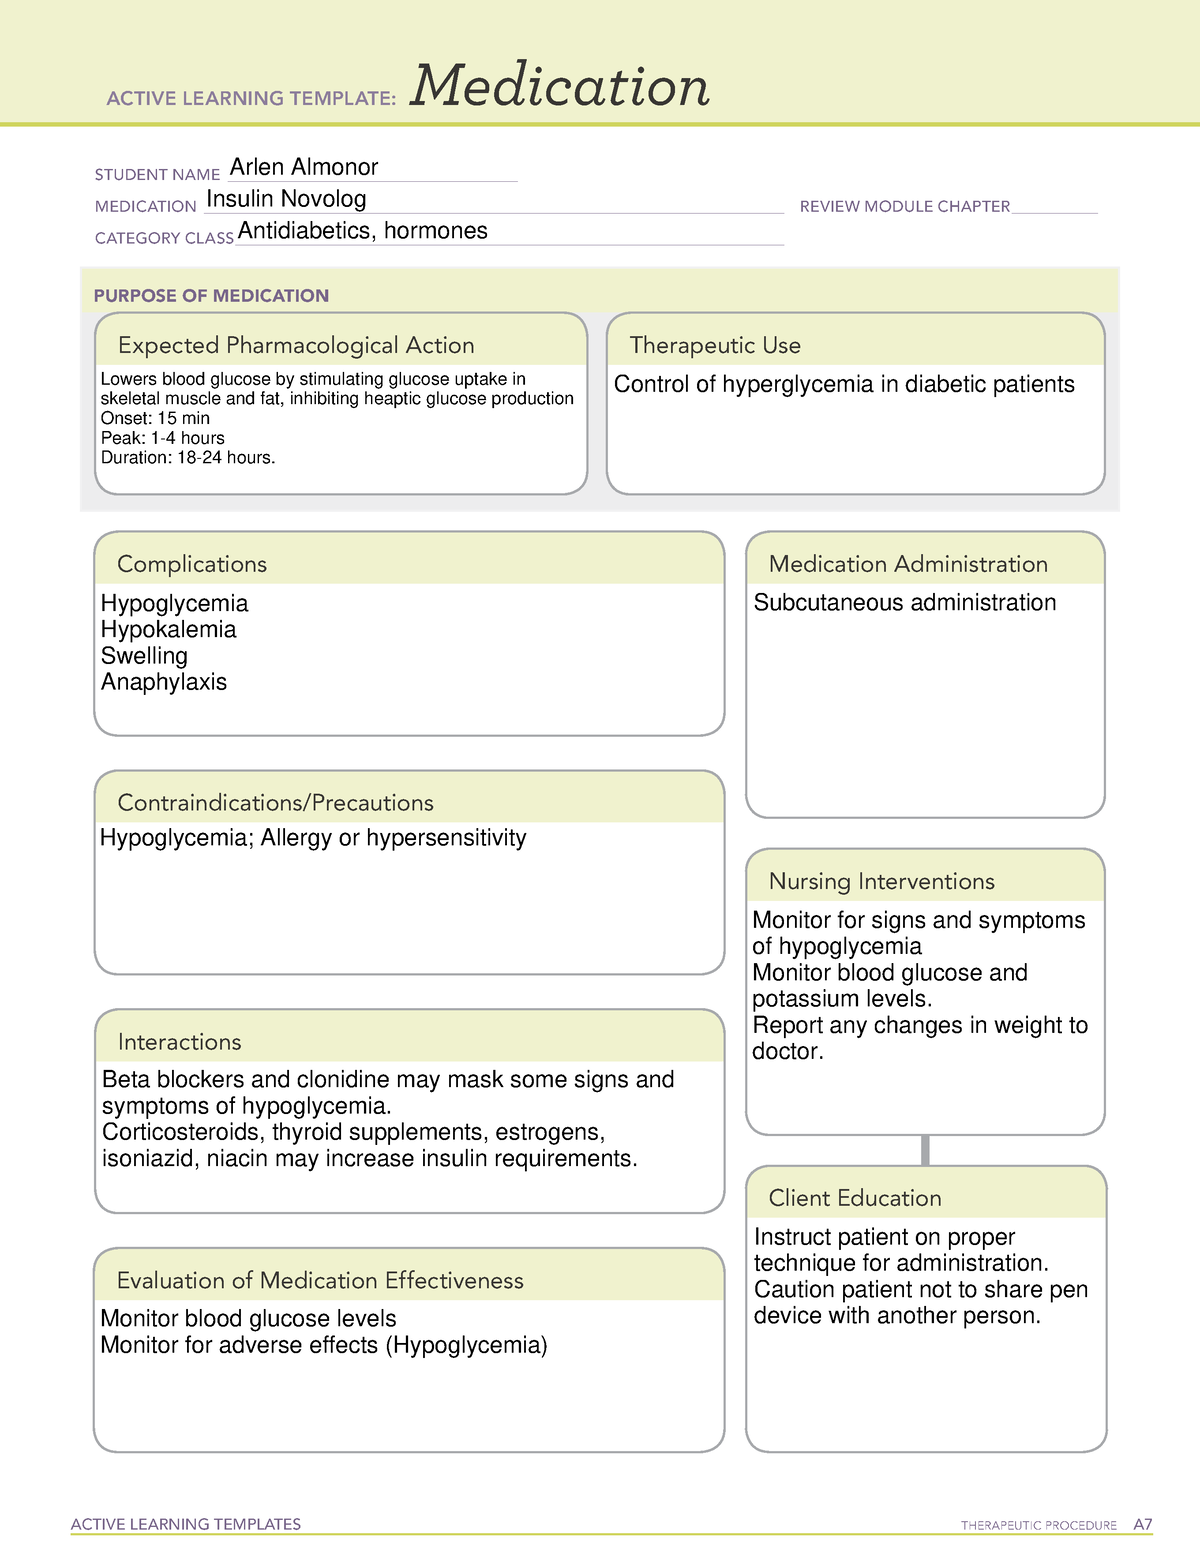 insulin-novolog-ati-med-card-active-learning-templates-therapeutic